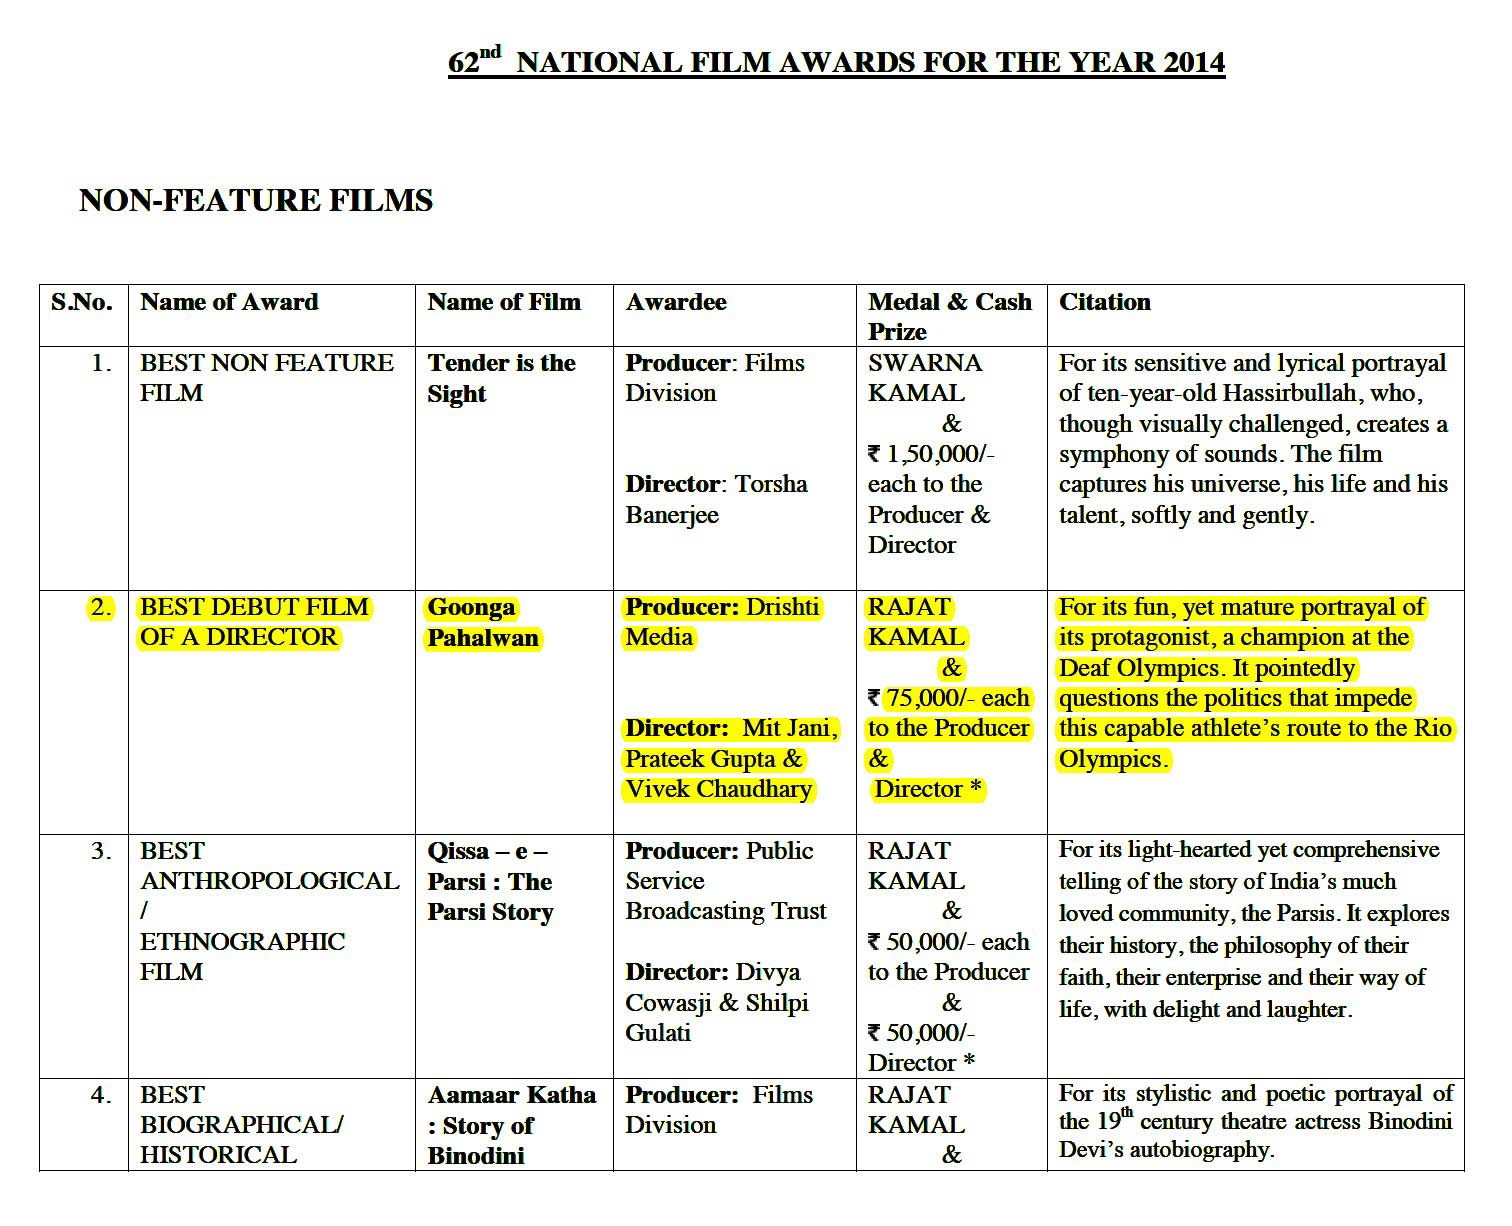 62nd-national-film-awards-for-the-year-2014